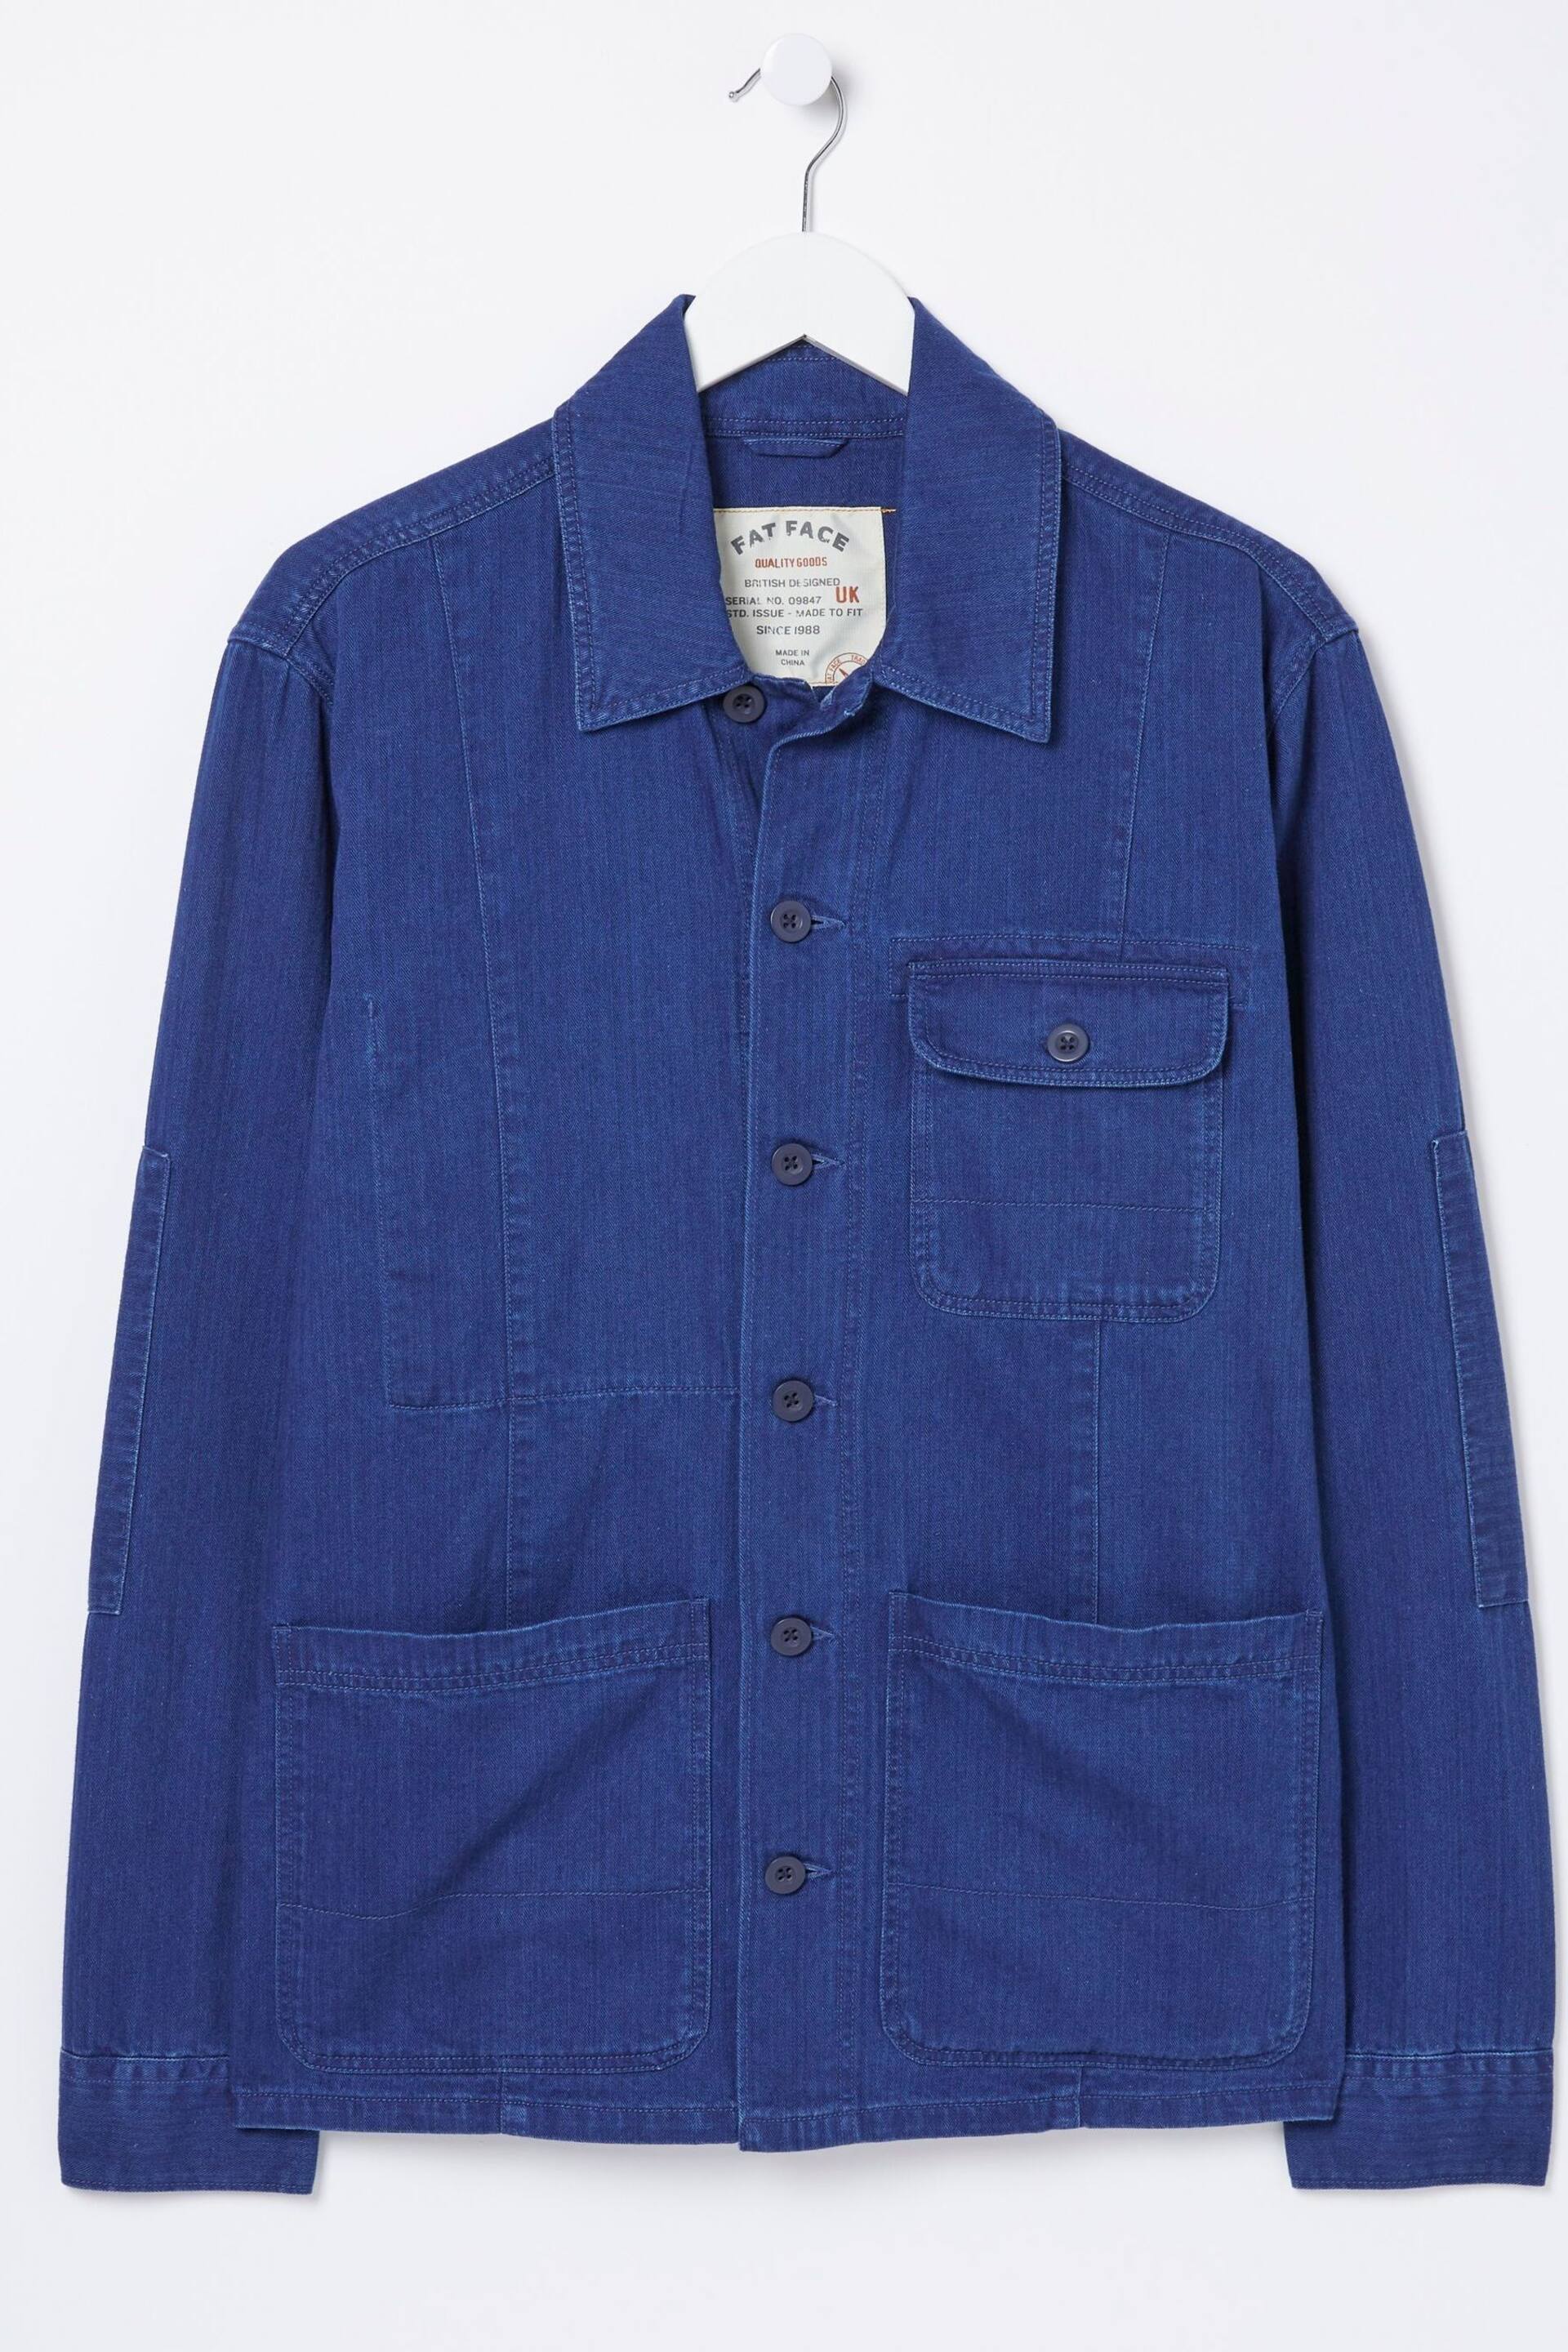 FatFace Blue Worker Jacket - Image 6 of 6